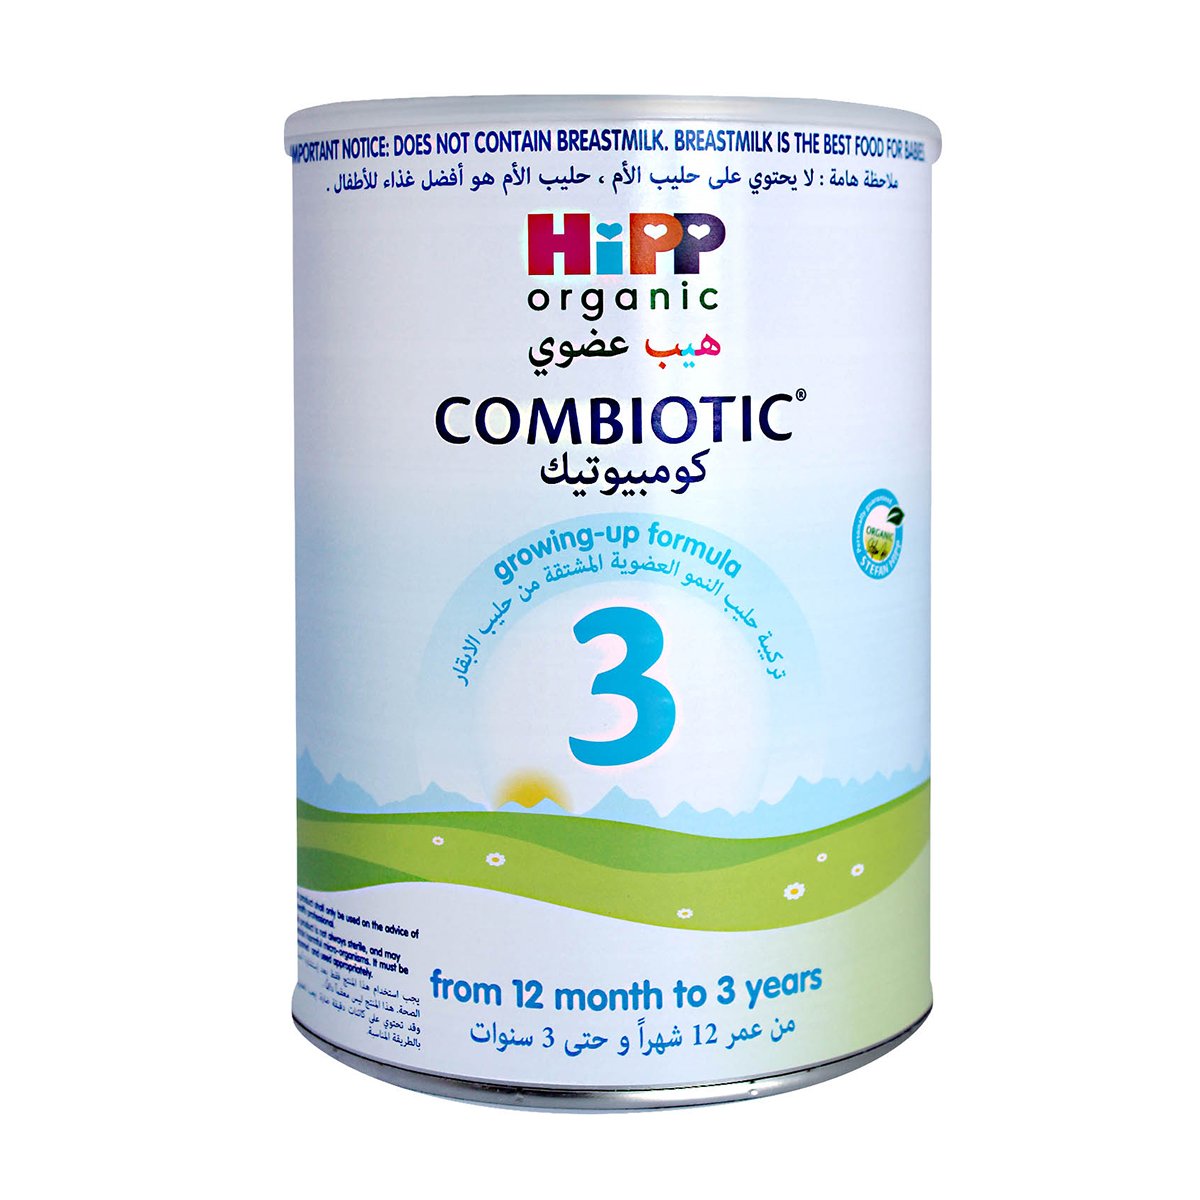 Hipp Organic Stage 3 Combiotic Growing Up Formula From 12 Month To 3 Years 800 g